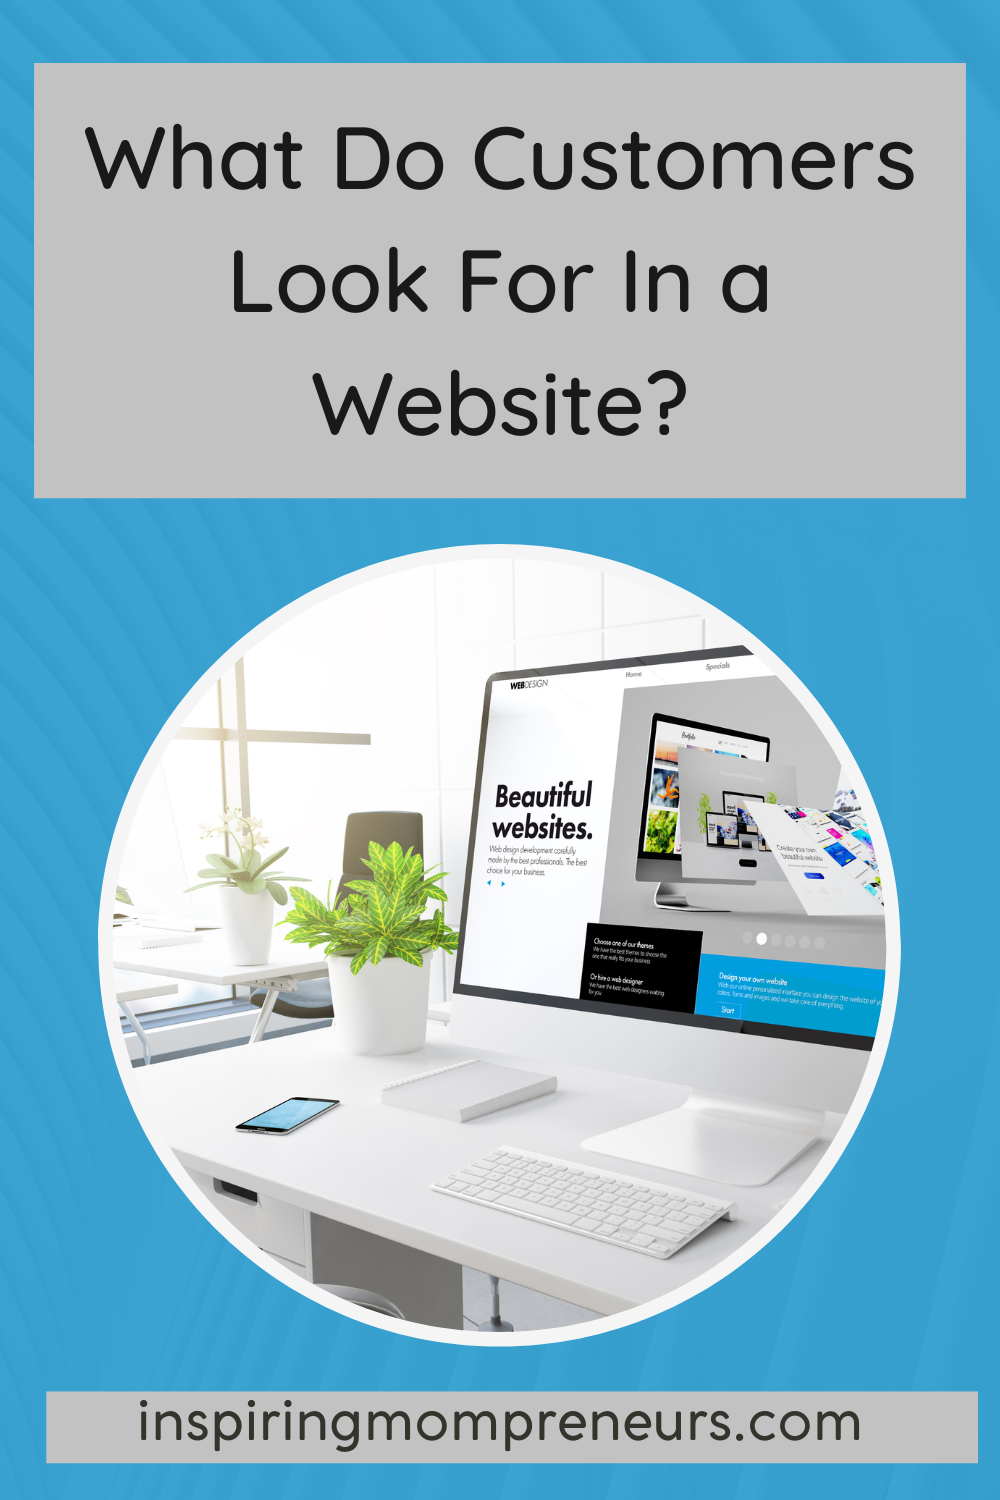 A business can’t put any old website online and expect it to bring in customers. Maybe in 2003 but not in 2023. So, what do customers look for in a website?